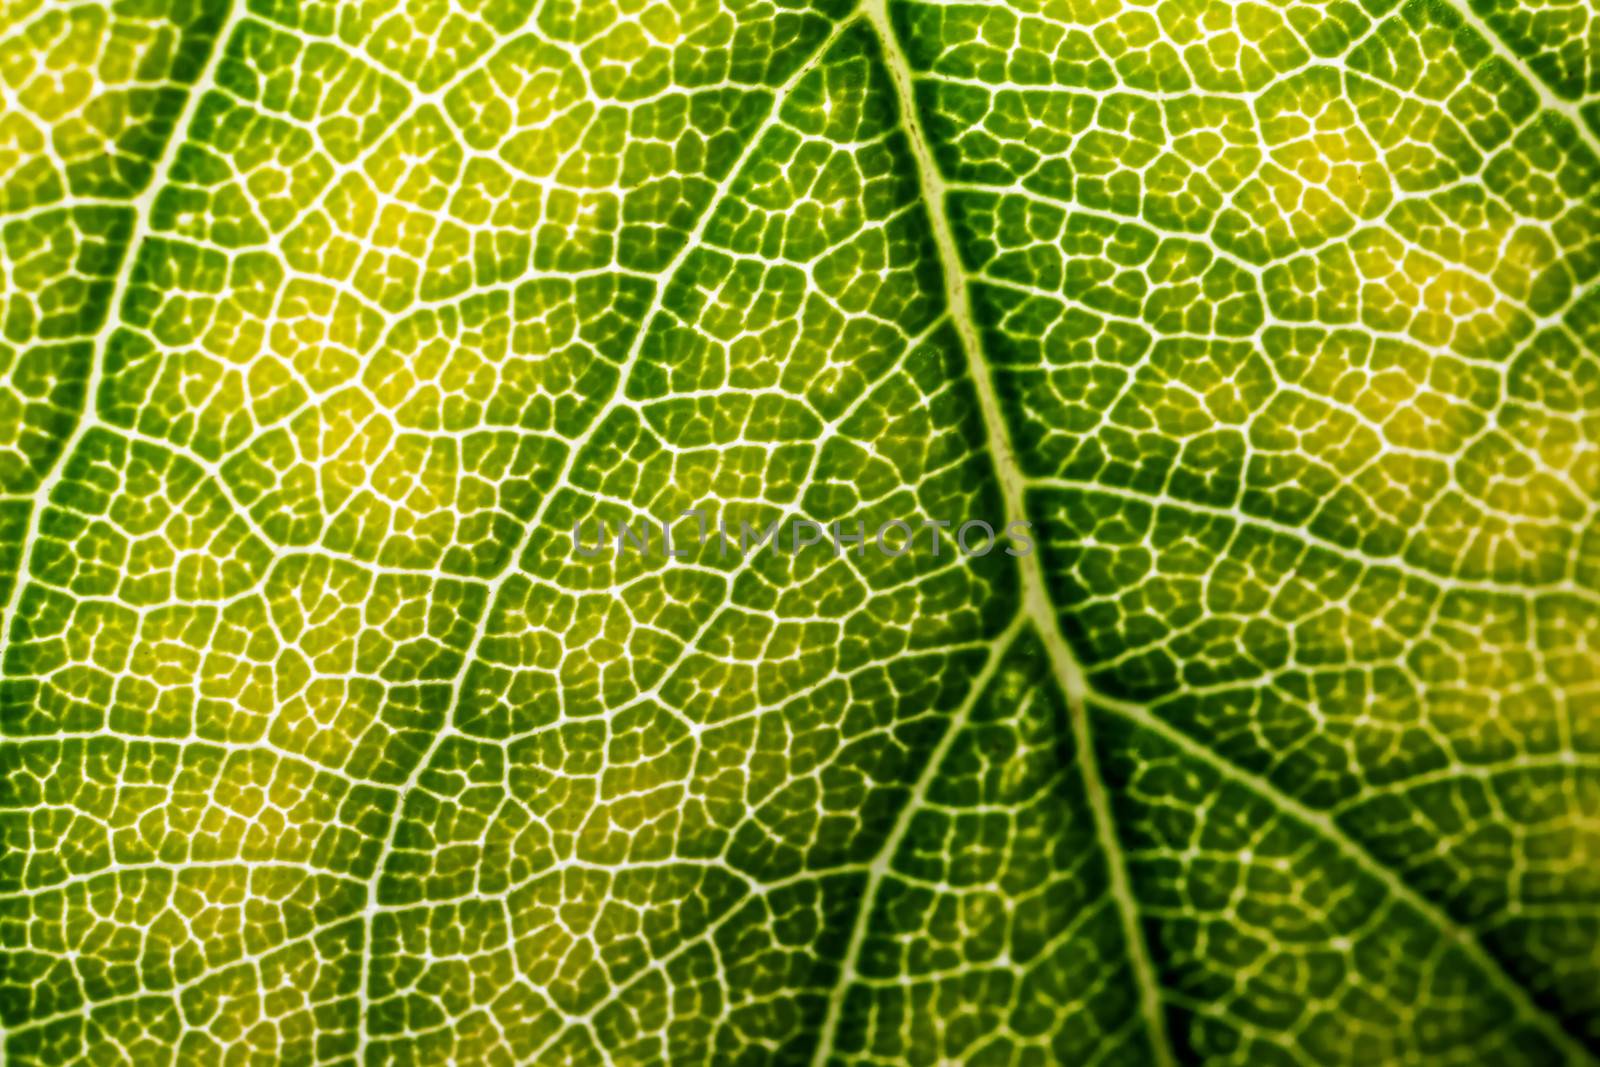 A super macro image showing detail on a plant leaf